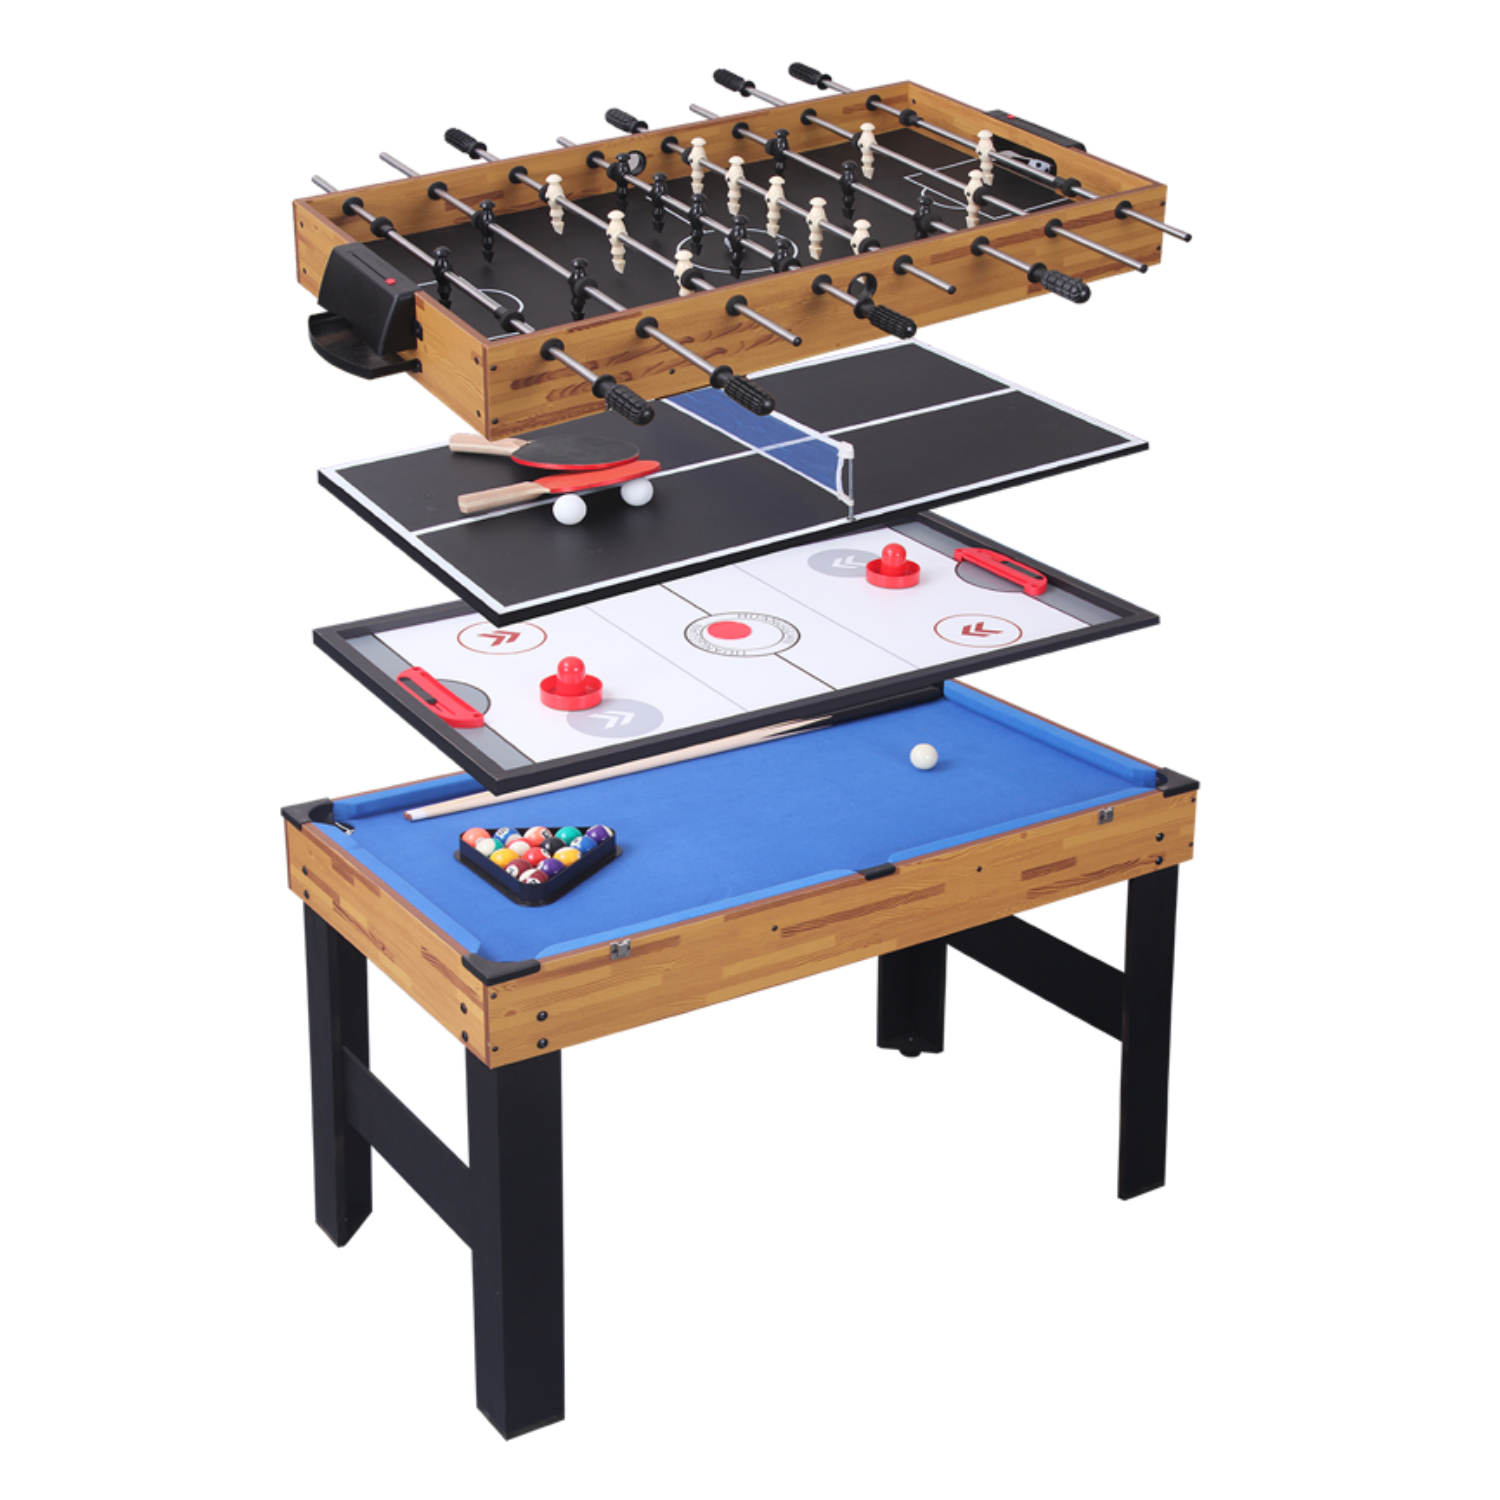 4FT 4IN1 Multifunctional Kids Game Table-Premium Quality